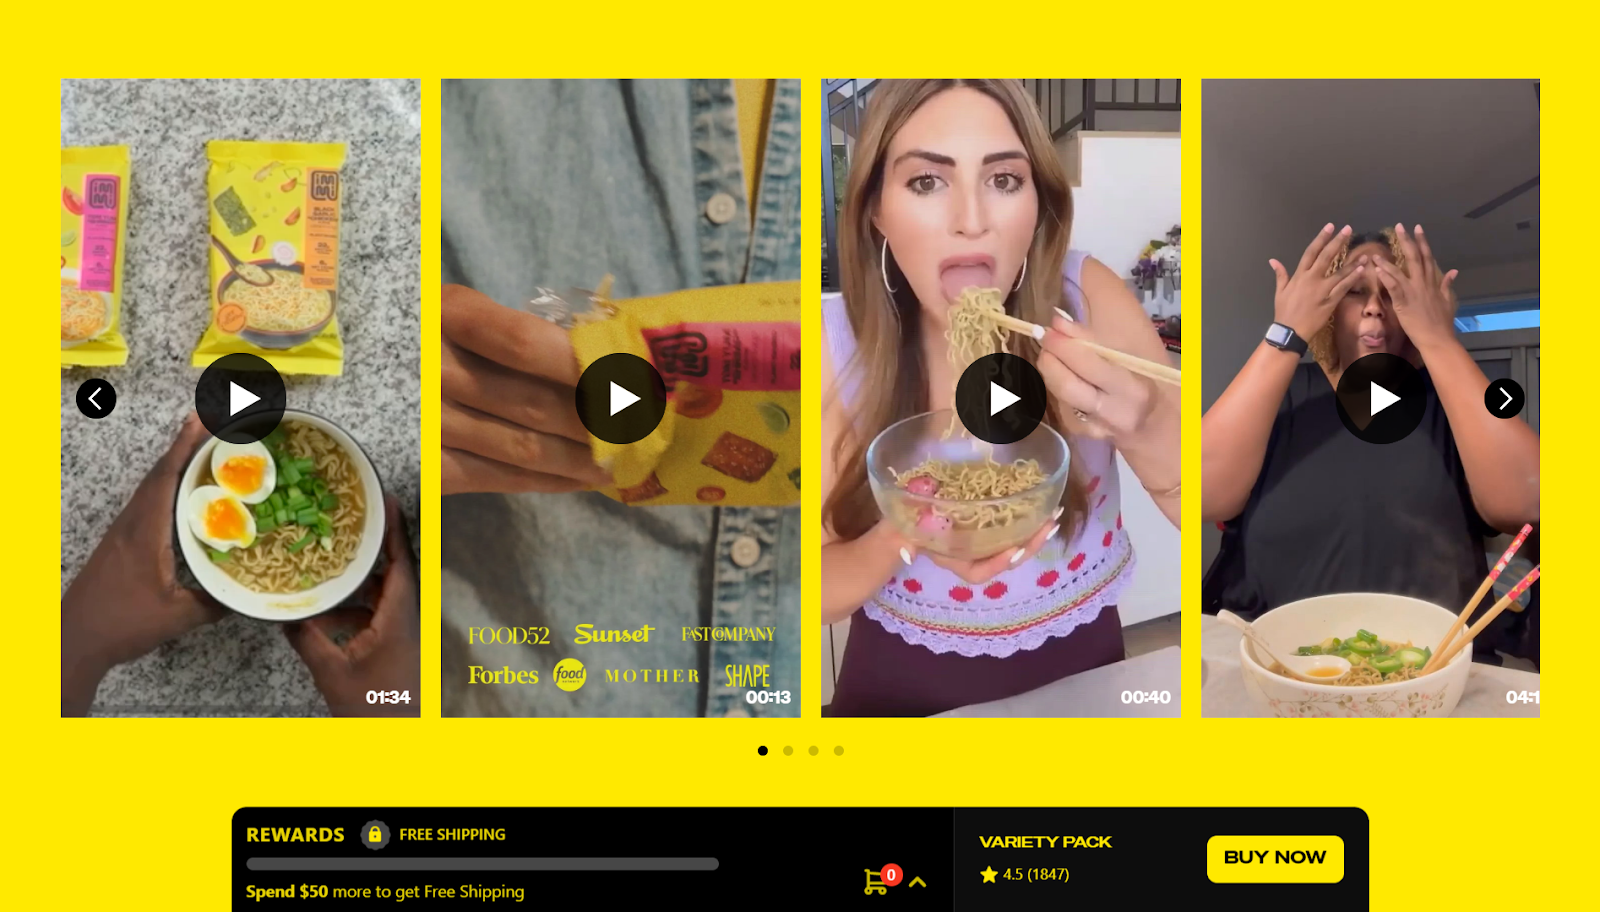  immi’s website page with use of interactive shoppable videos powered by Videowise